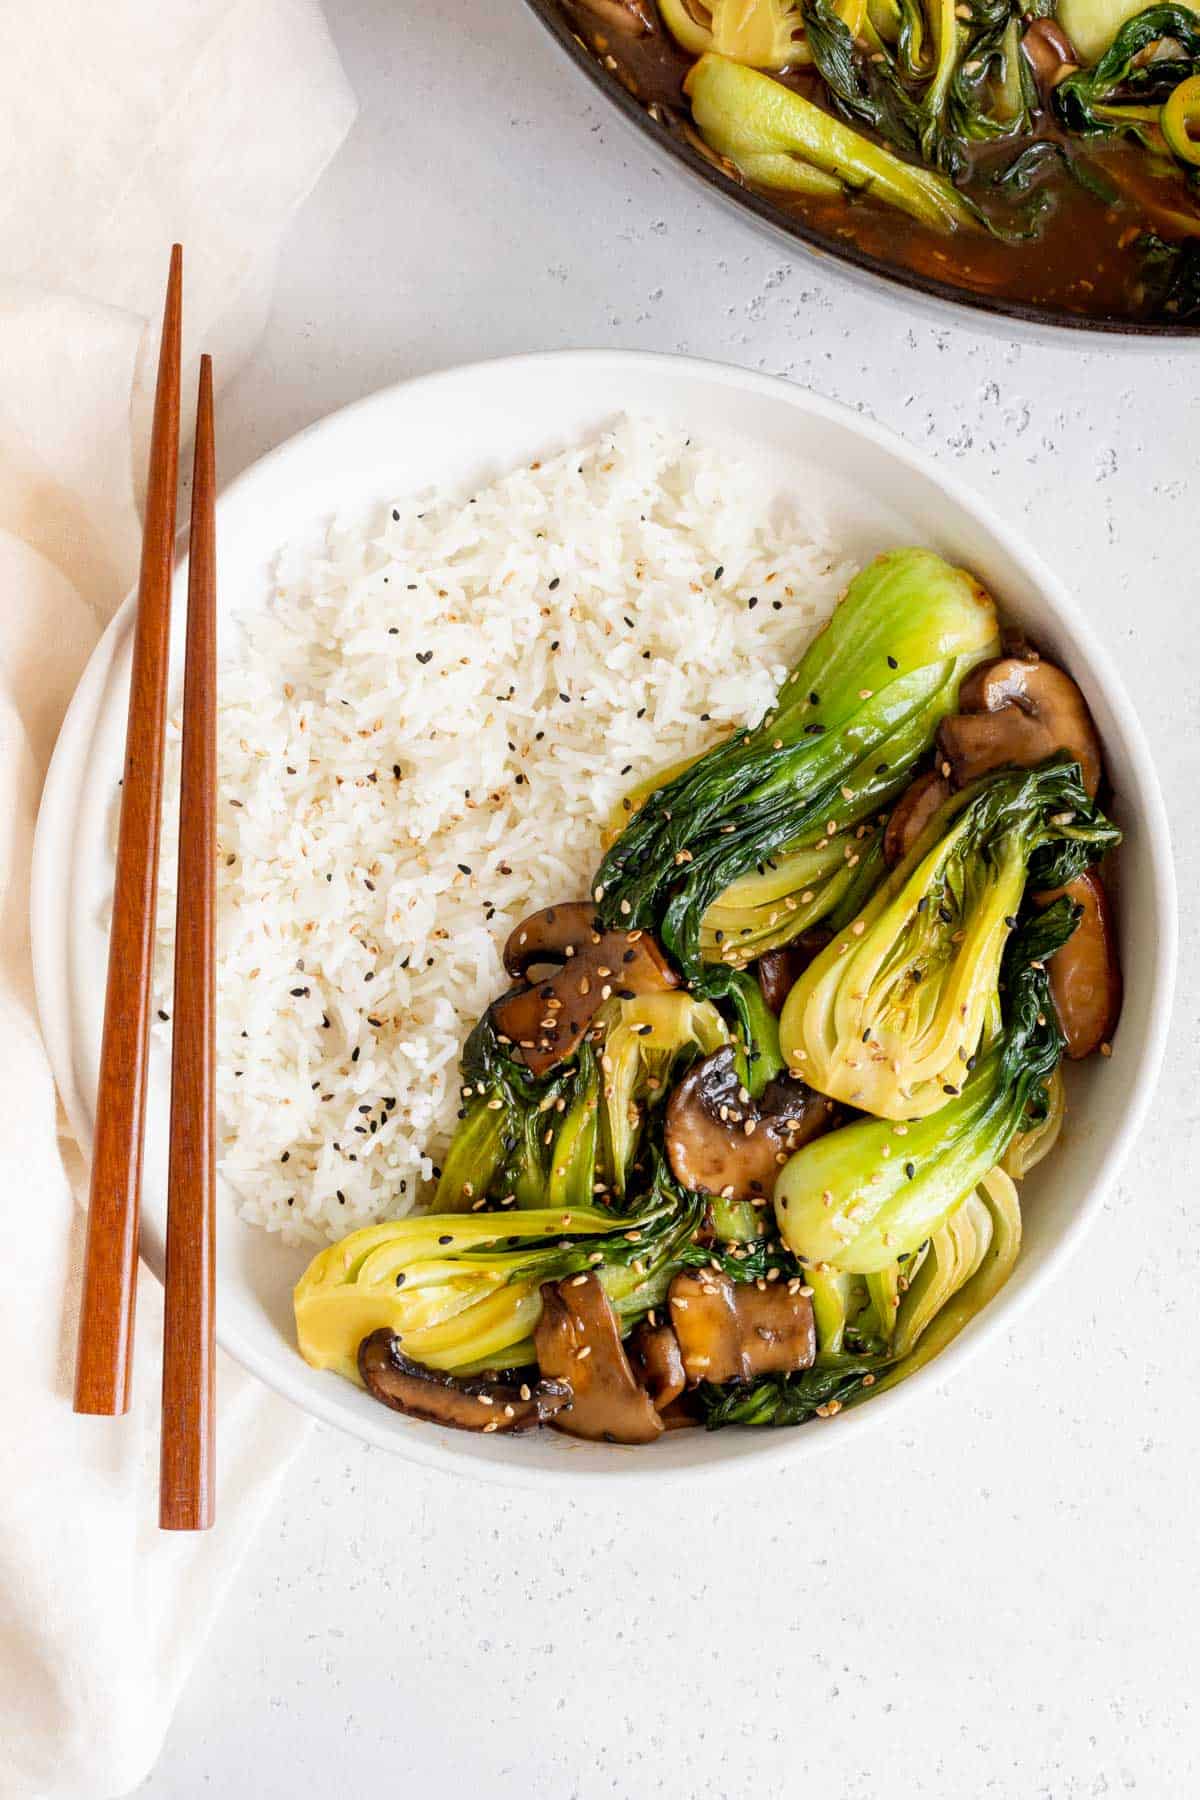 A plate of rice and bok choy stir fry with a pair of chopsticks on the side.